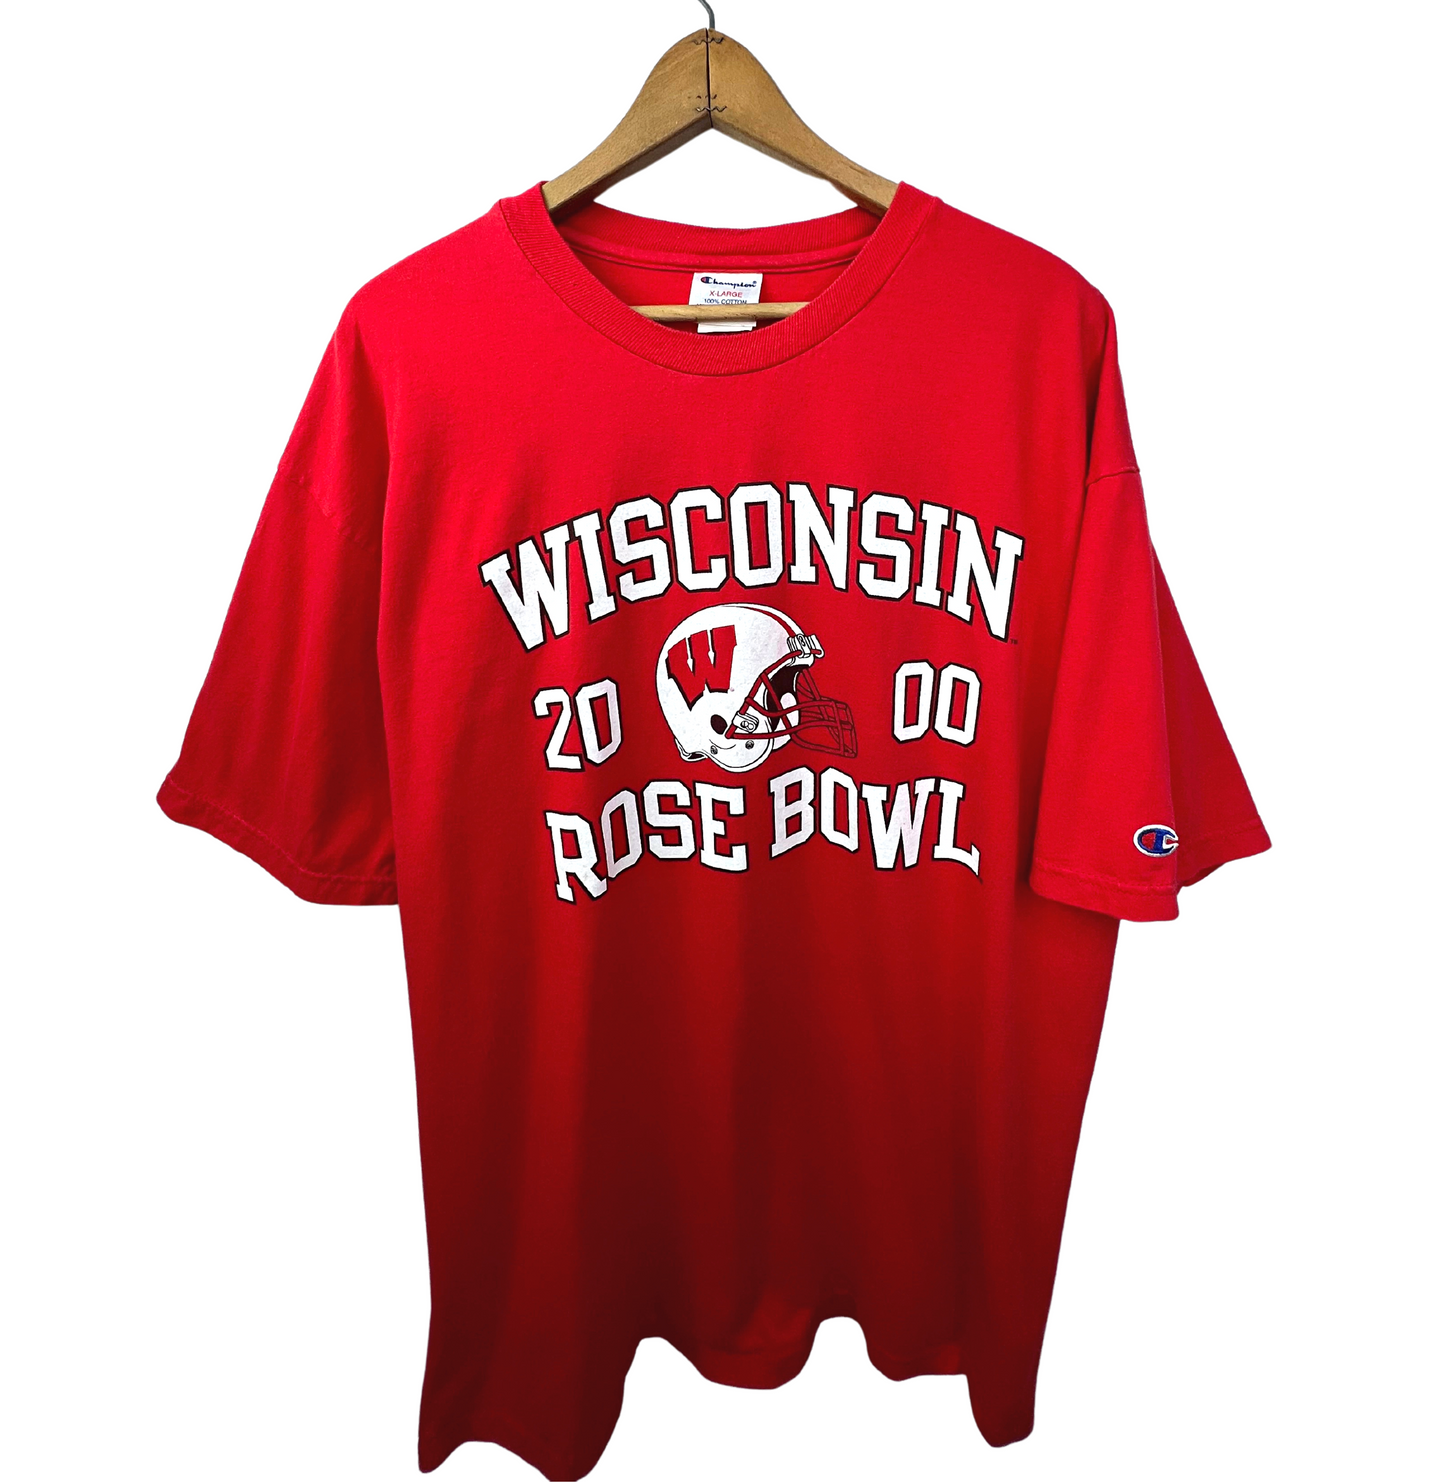 2000 Rose Bowl Wisconsin Badgers 100% Cotton CHAMPION T-shirt Size XL